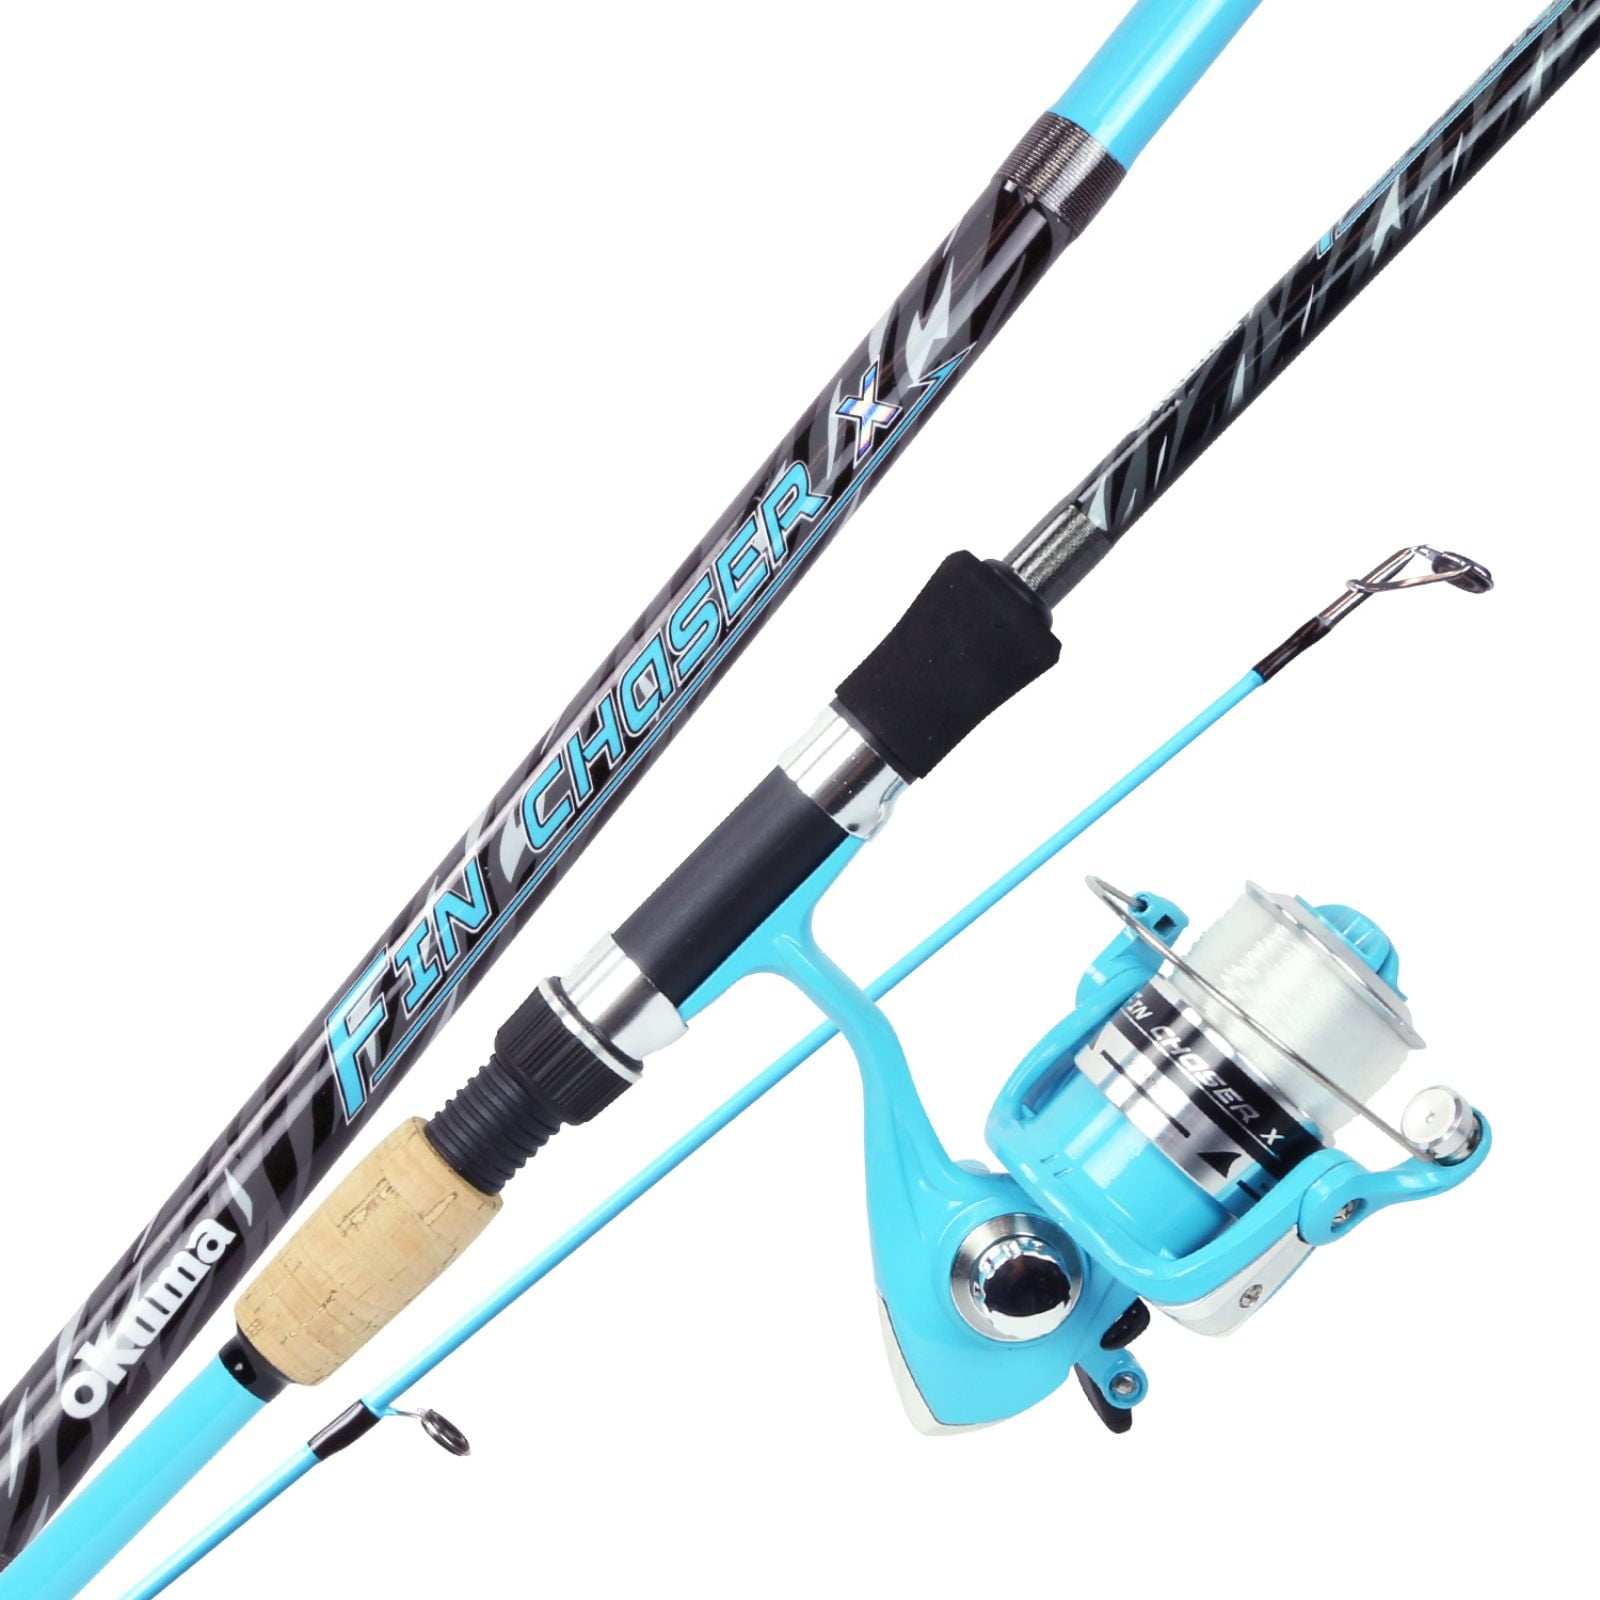 Okuma Fin Chaser x Series Spinning Fishing Rod and Reel Combo, Sea Foam,  7ft 